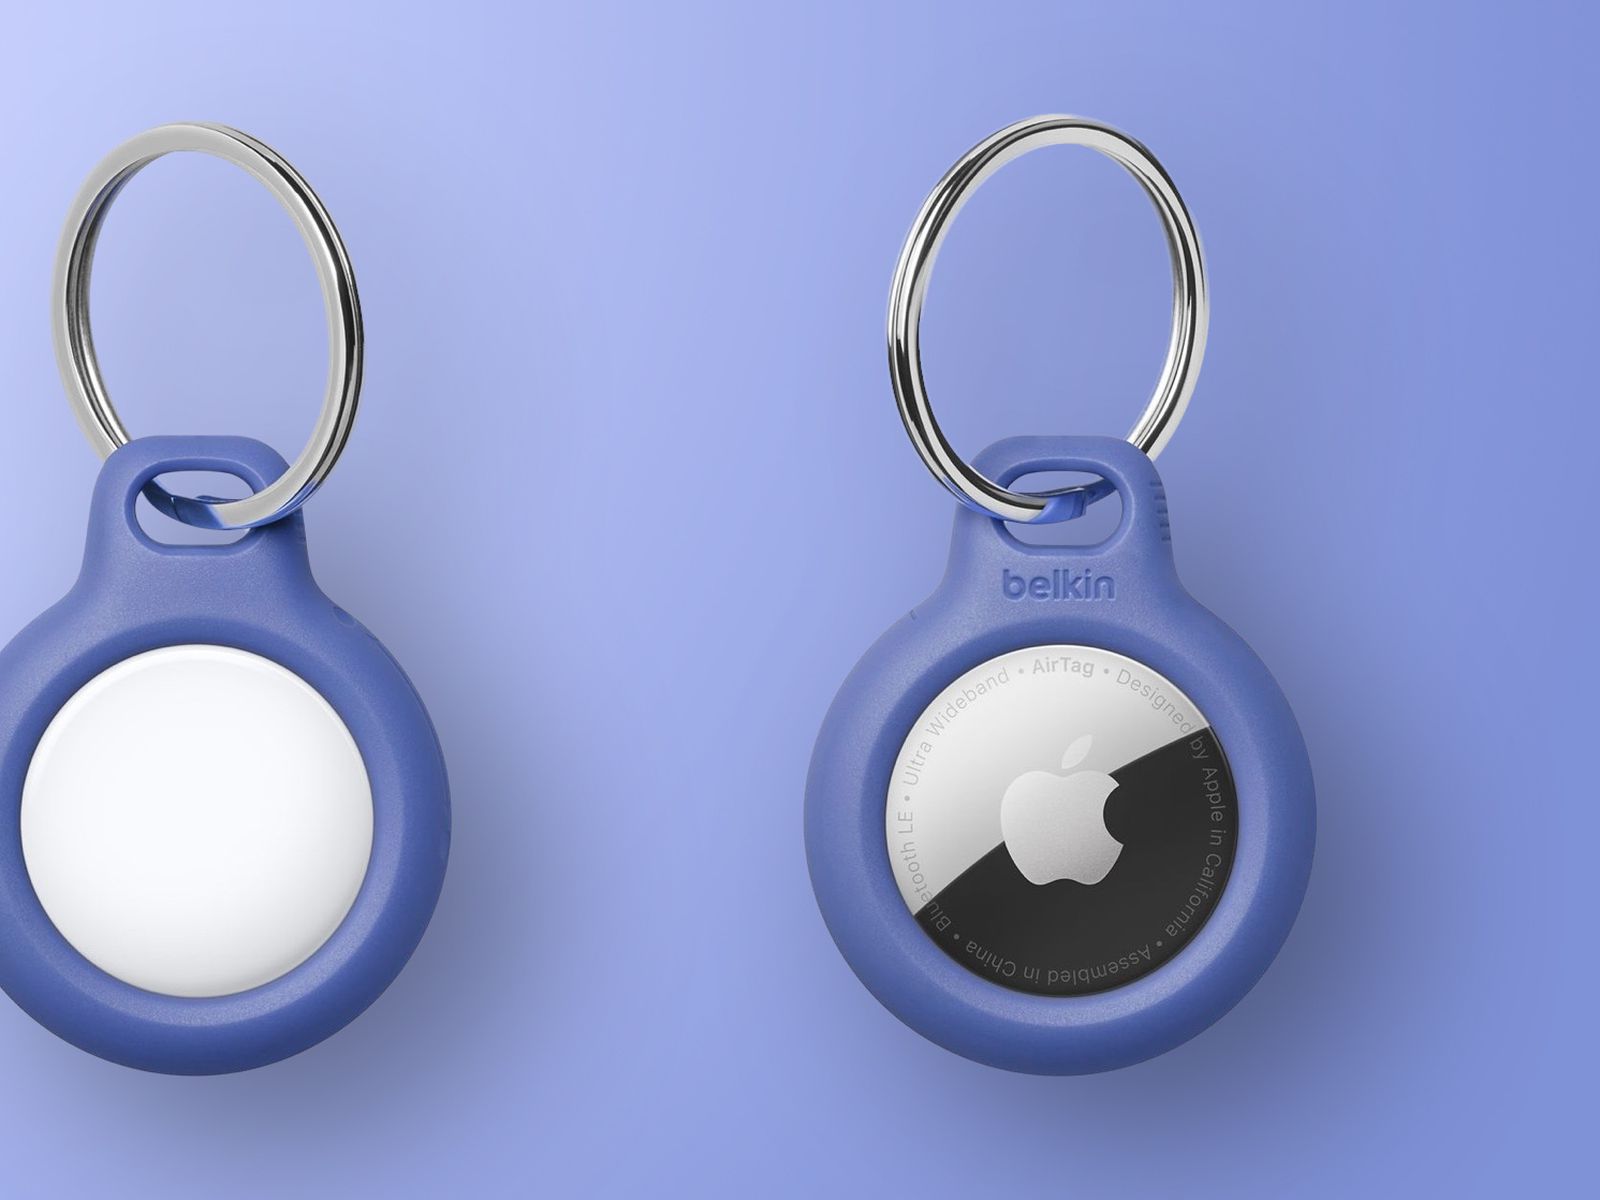 AirTag Accessories: Keyrings and Holders for Apple's AirTags